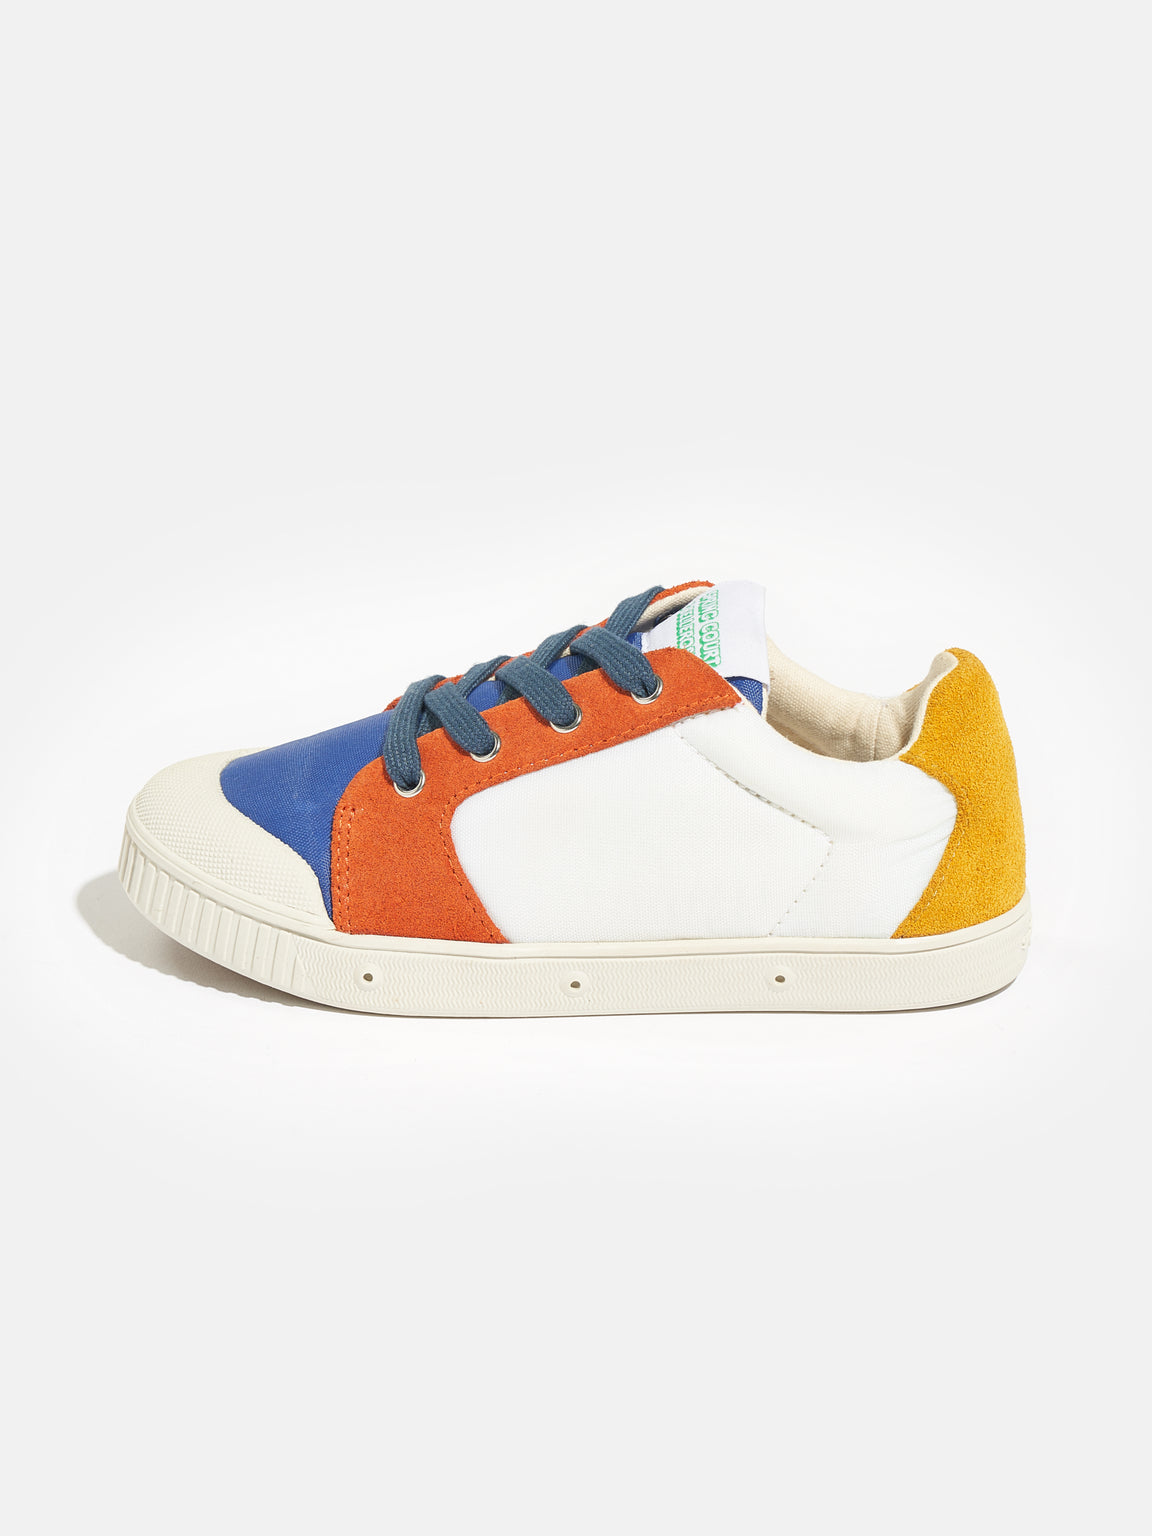 SPRING COURT x BELLEROSE | C2 NYLON SUEDE FOR KIDS YELLOW